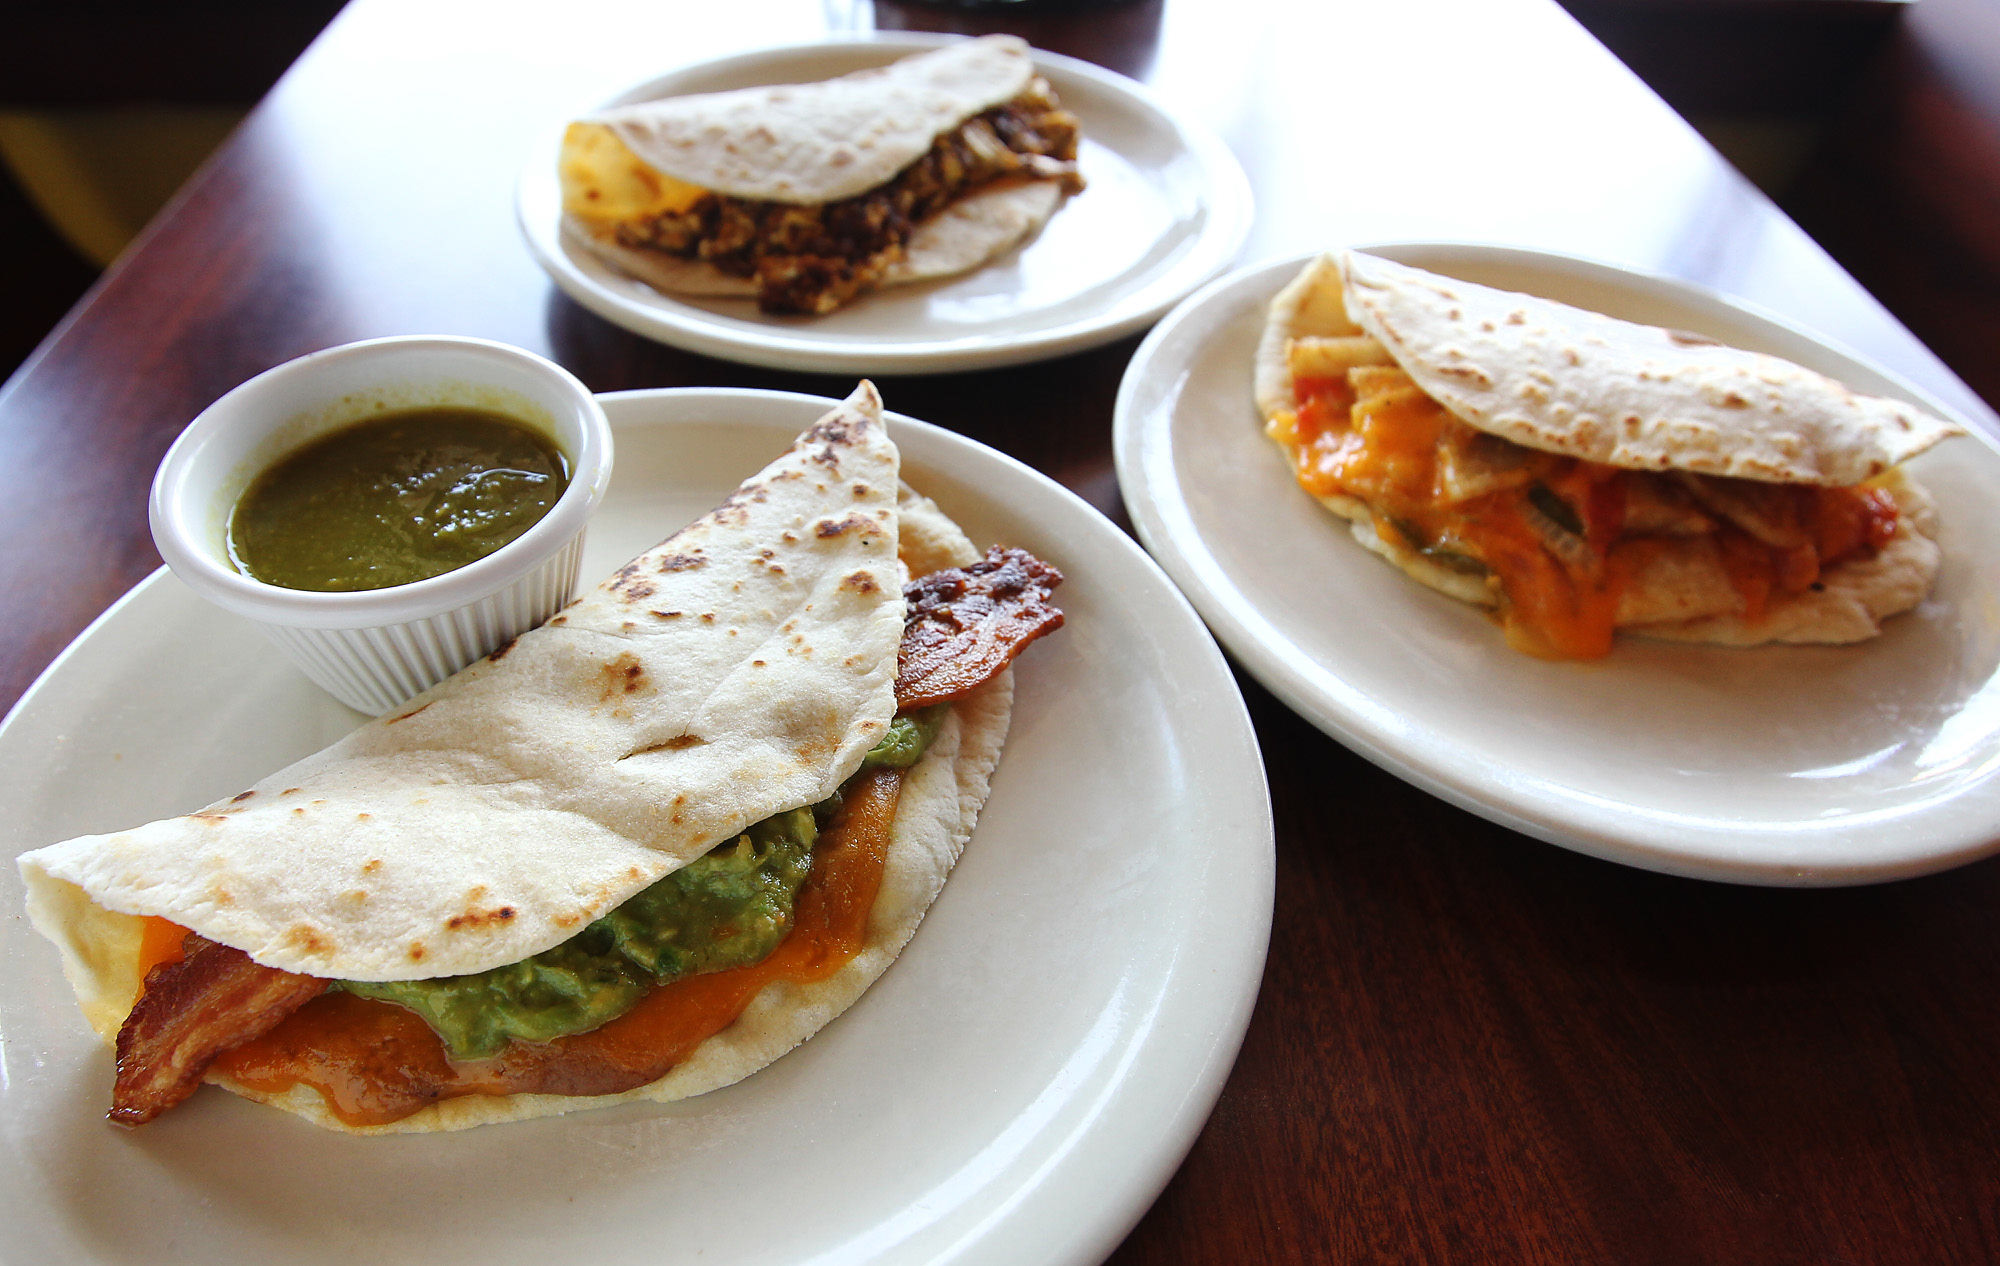 Heard About Eats: Breakfast tacos among top items